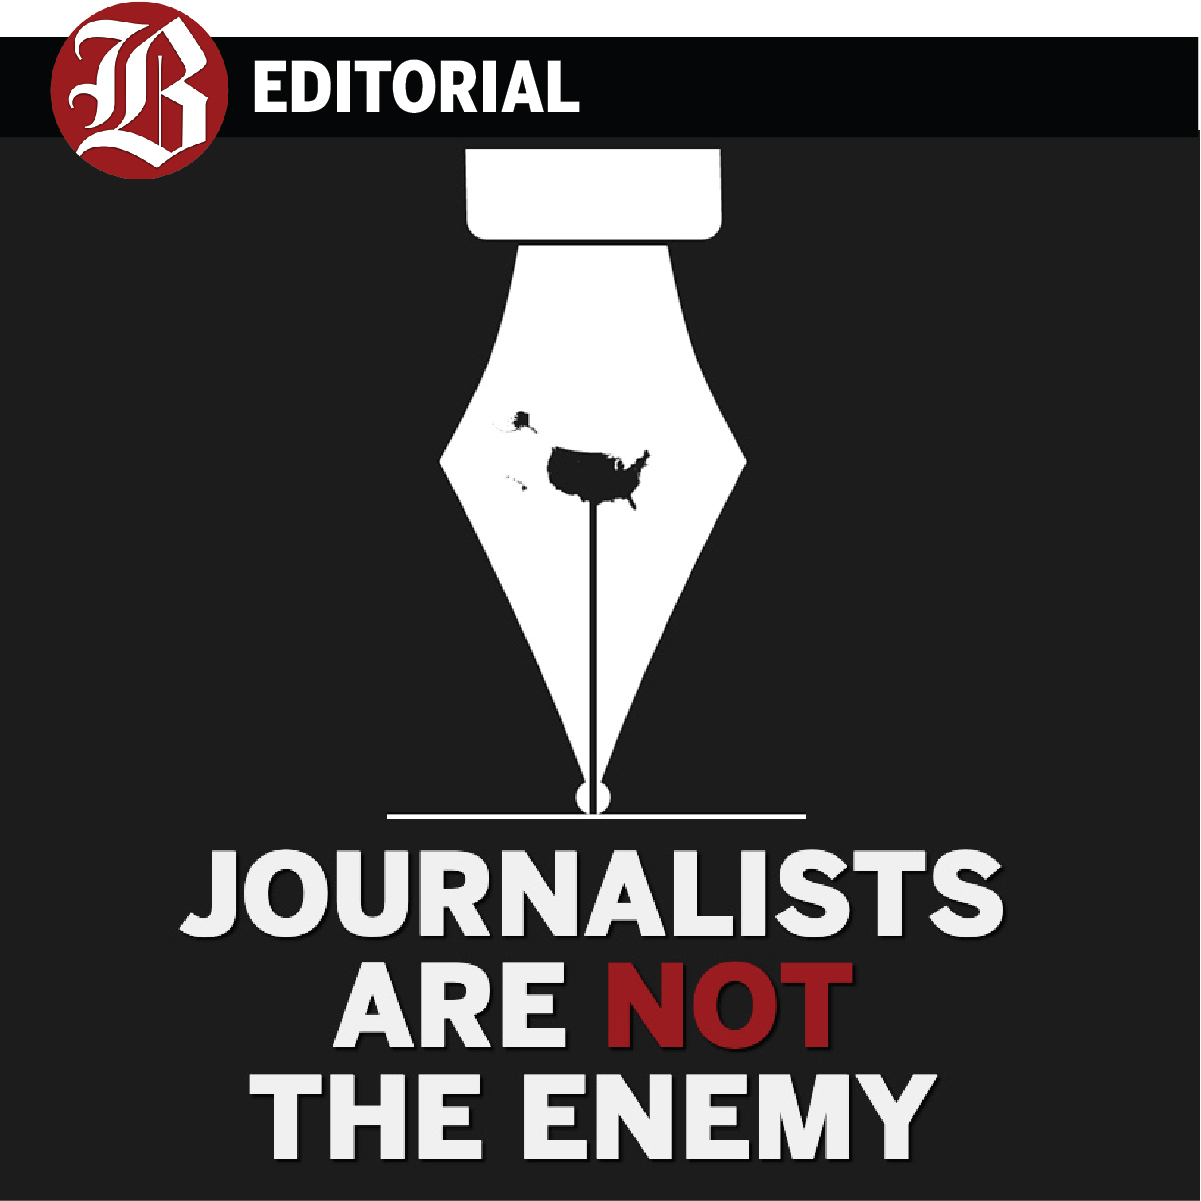 Journalists are not the enemy